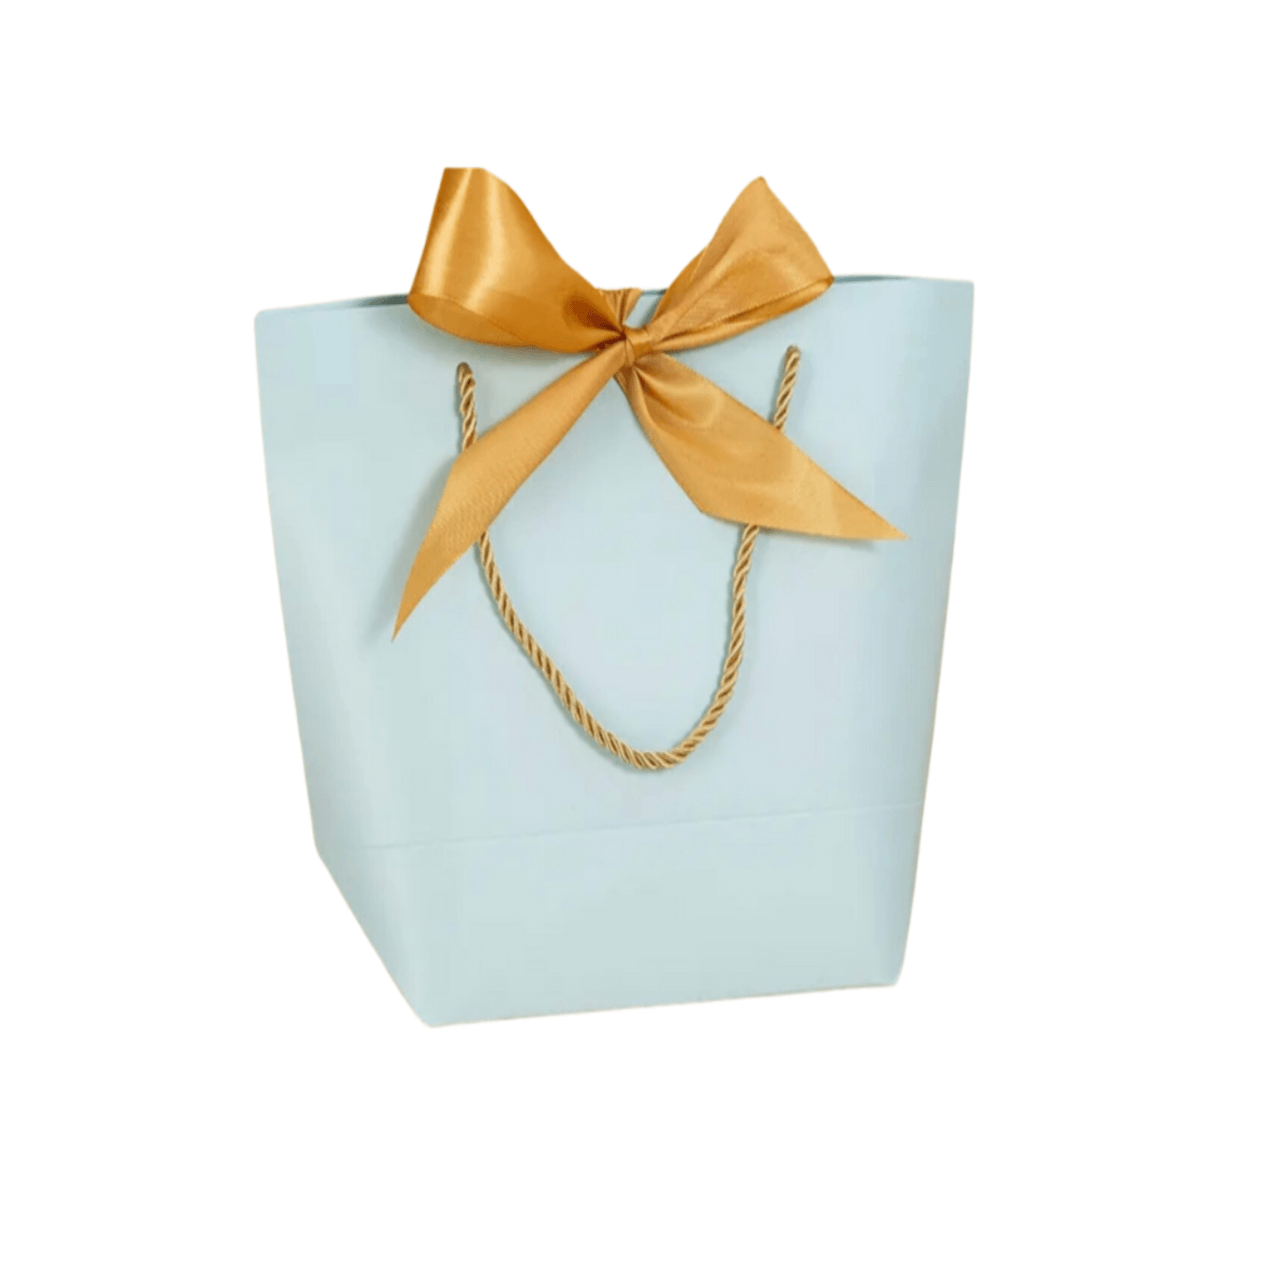 Gift Bag with Gold Bow - Expat Life Style